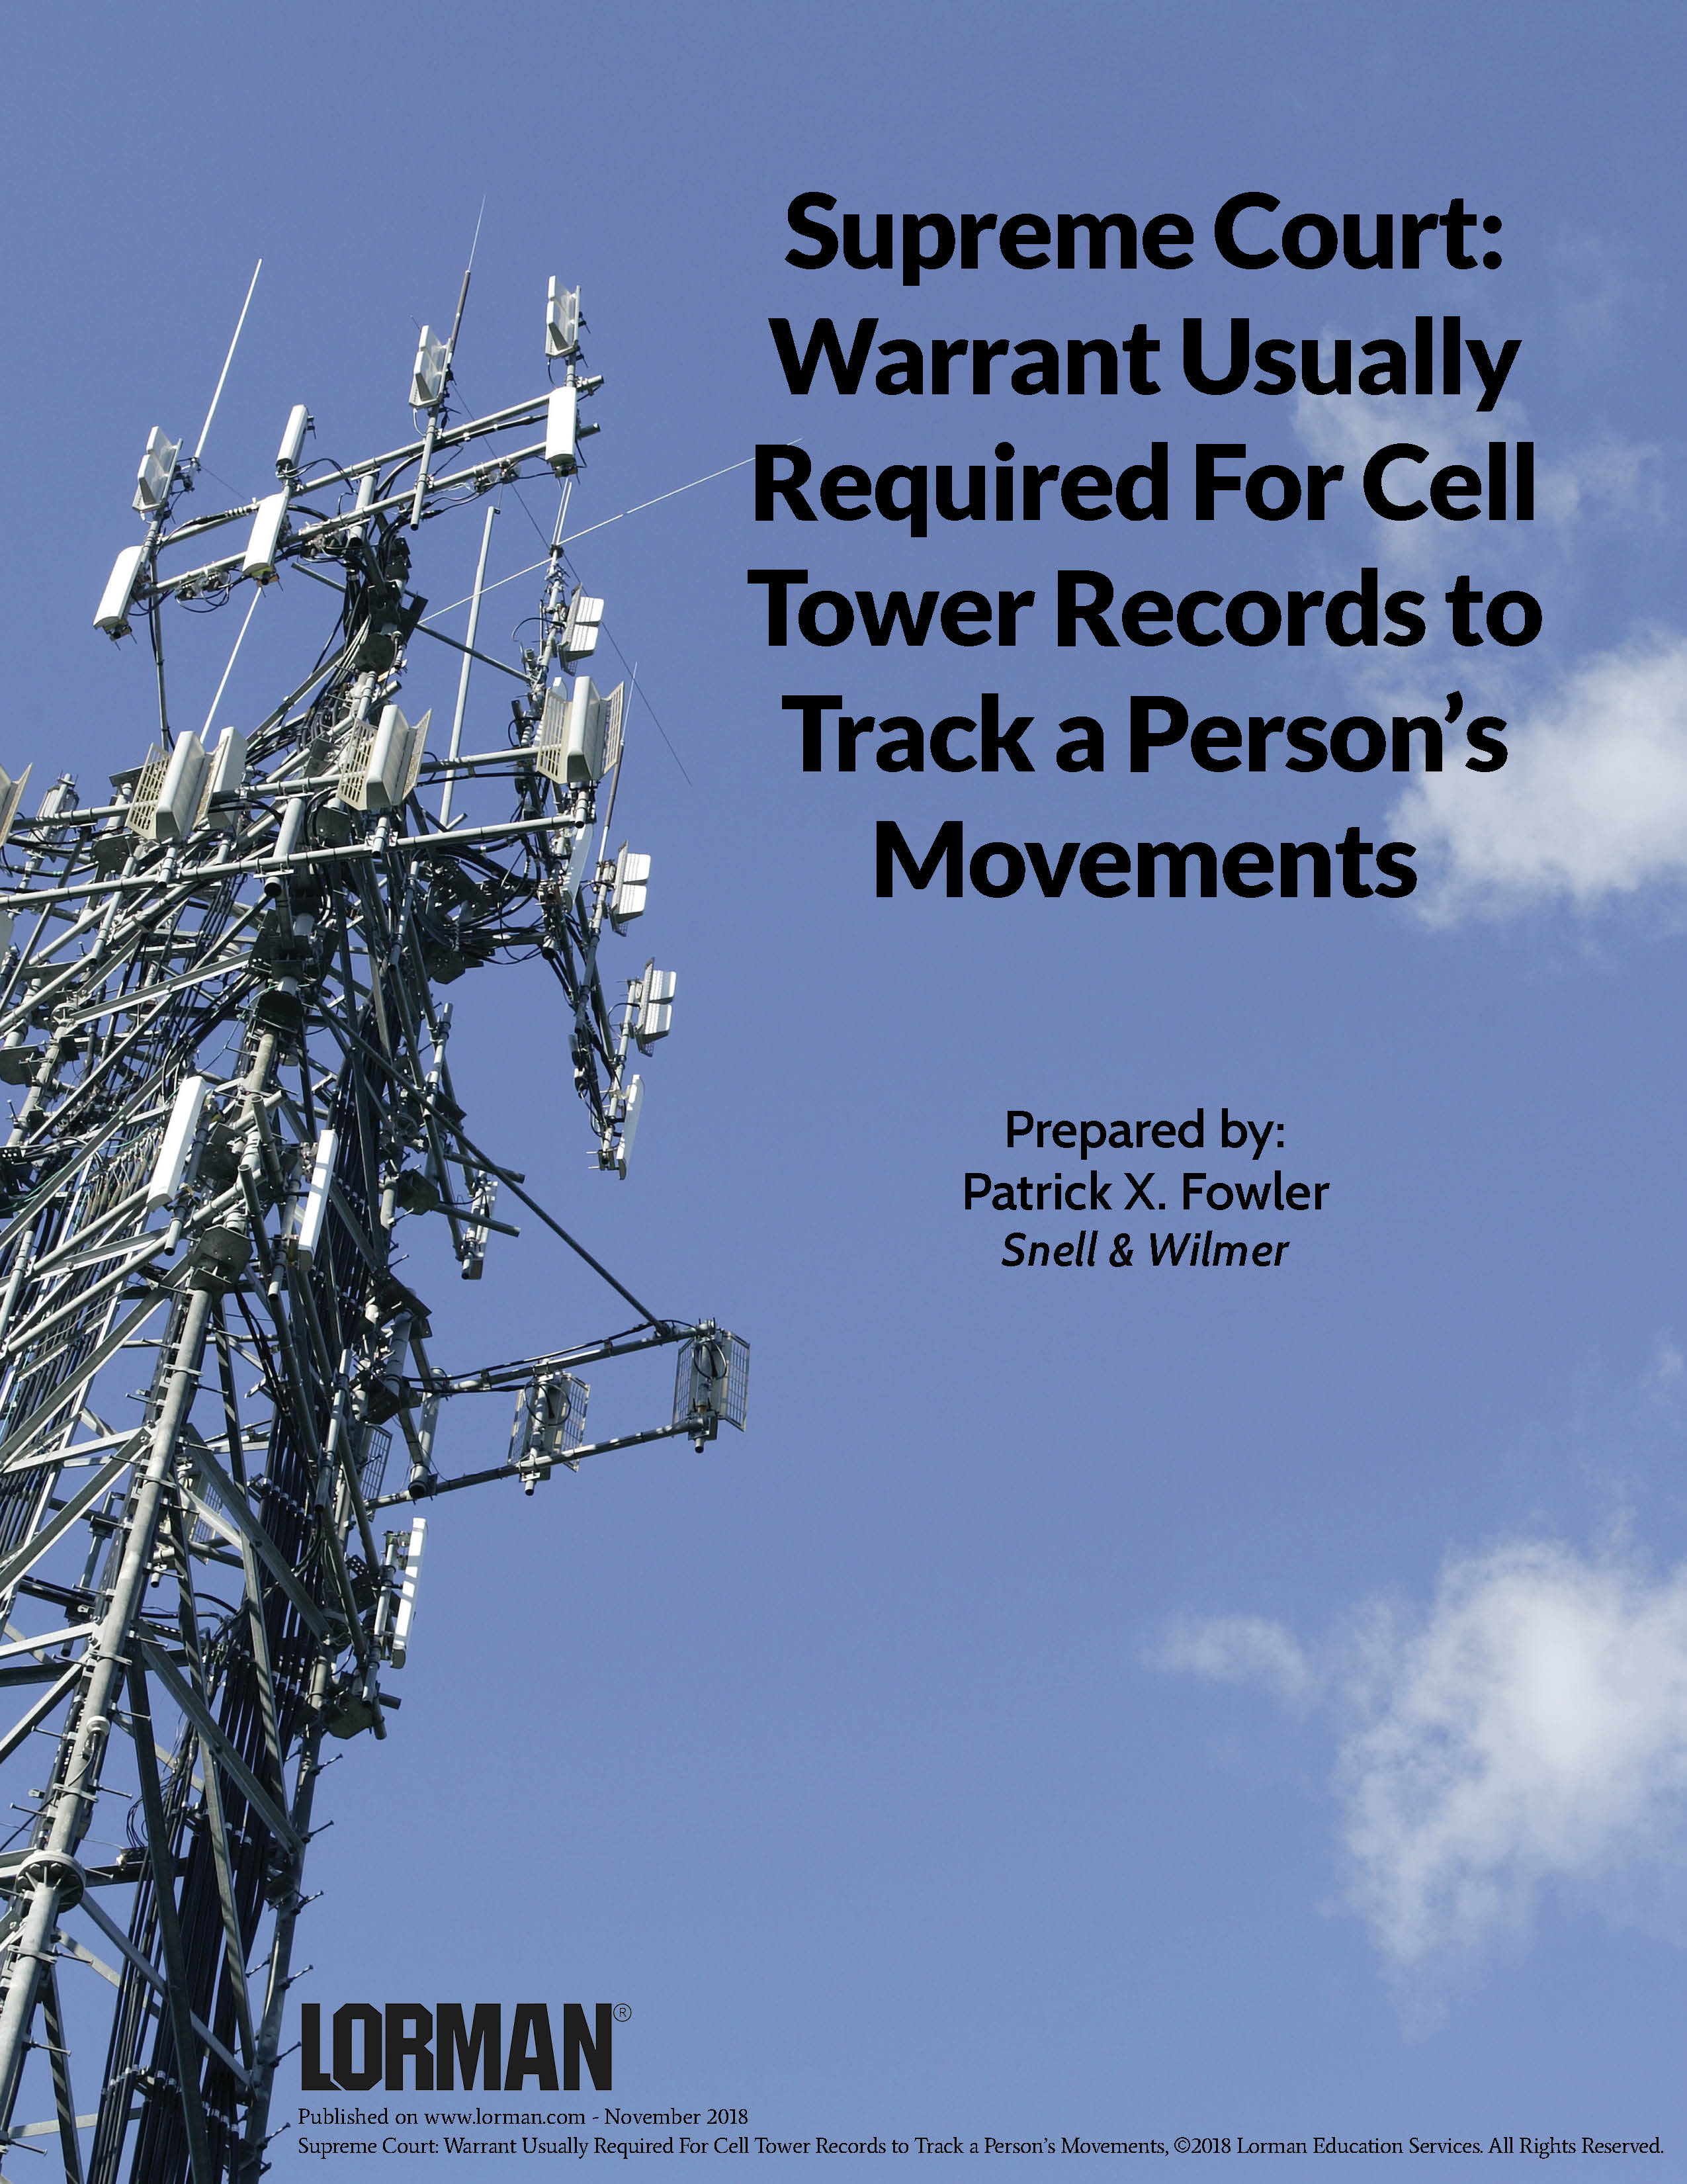 Supreme Court: Warrant Usually Required For Cell Tower Records to Track a Person’s Movements